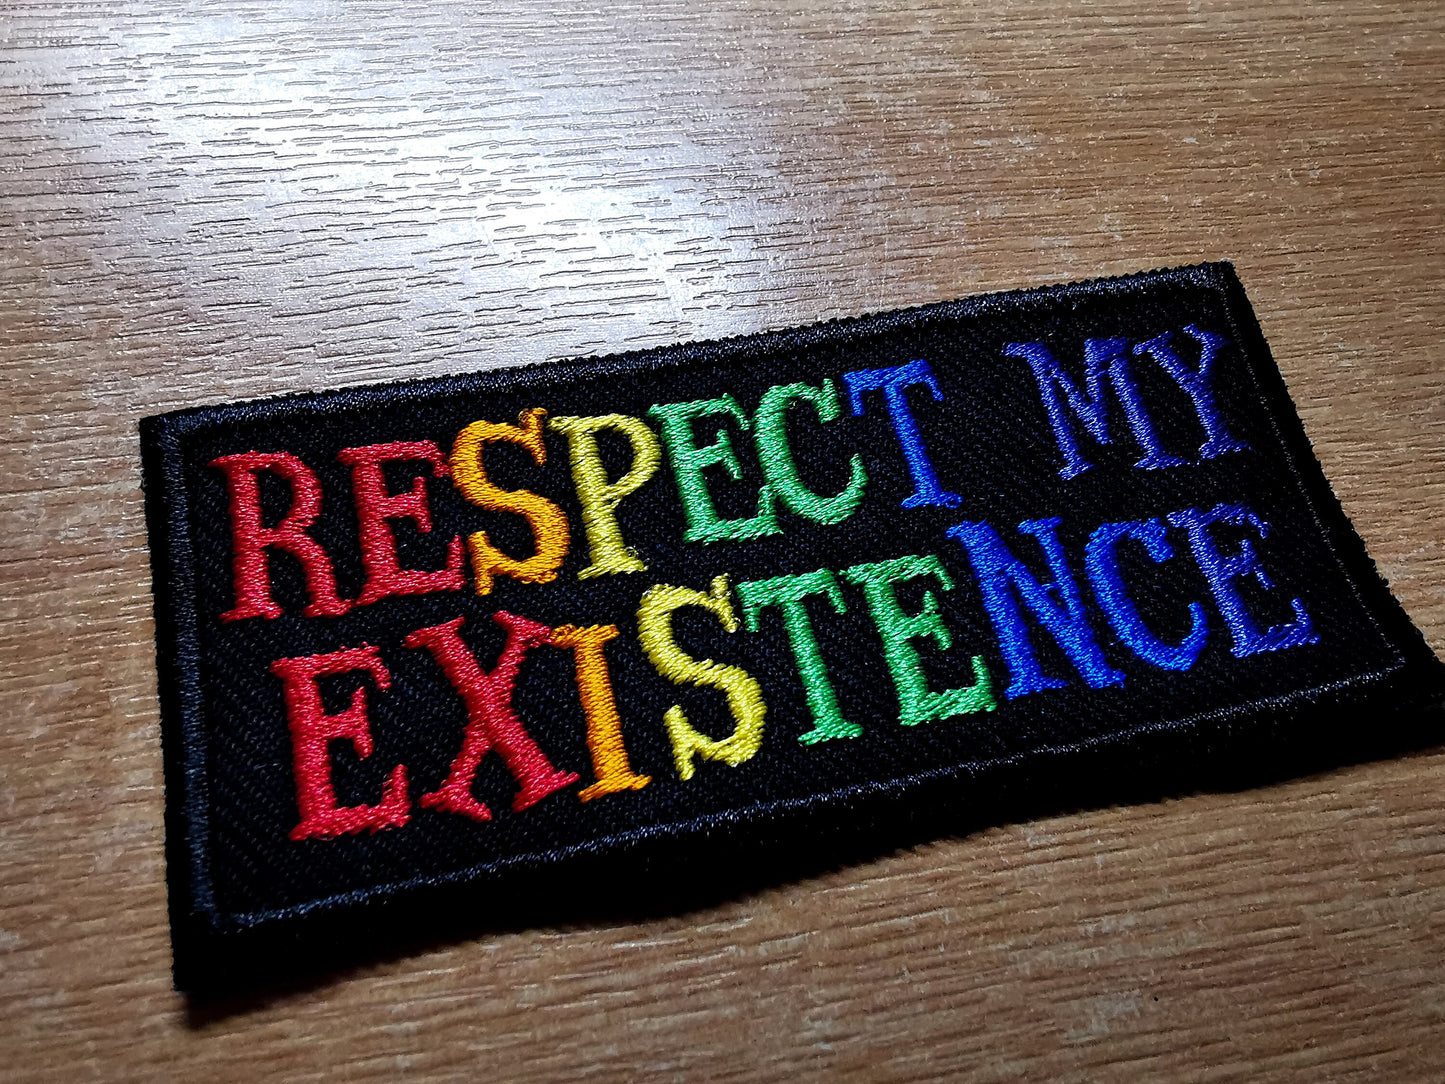 Respect My Existence Trans Rights Embroidered Patch Rainbow LGBTQ+ Patches